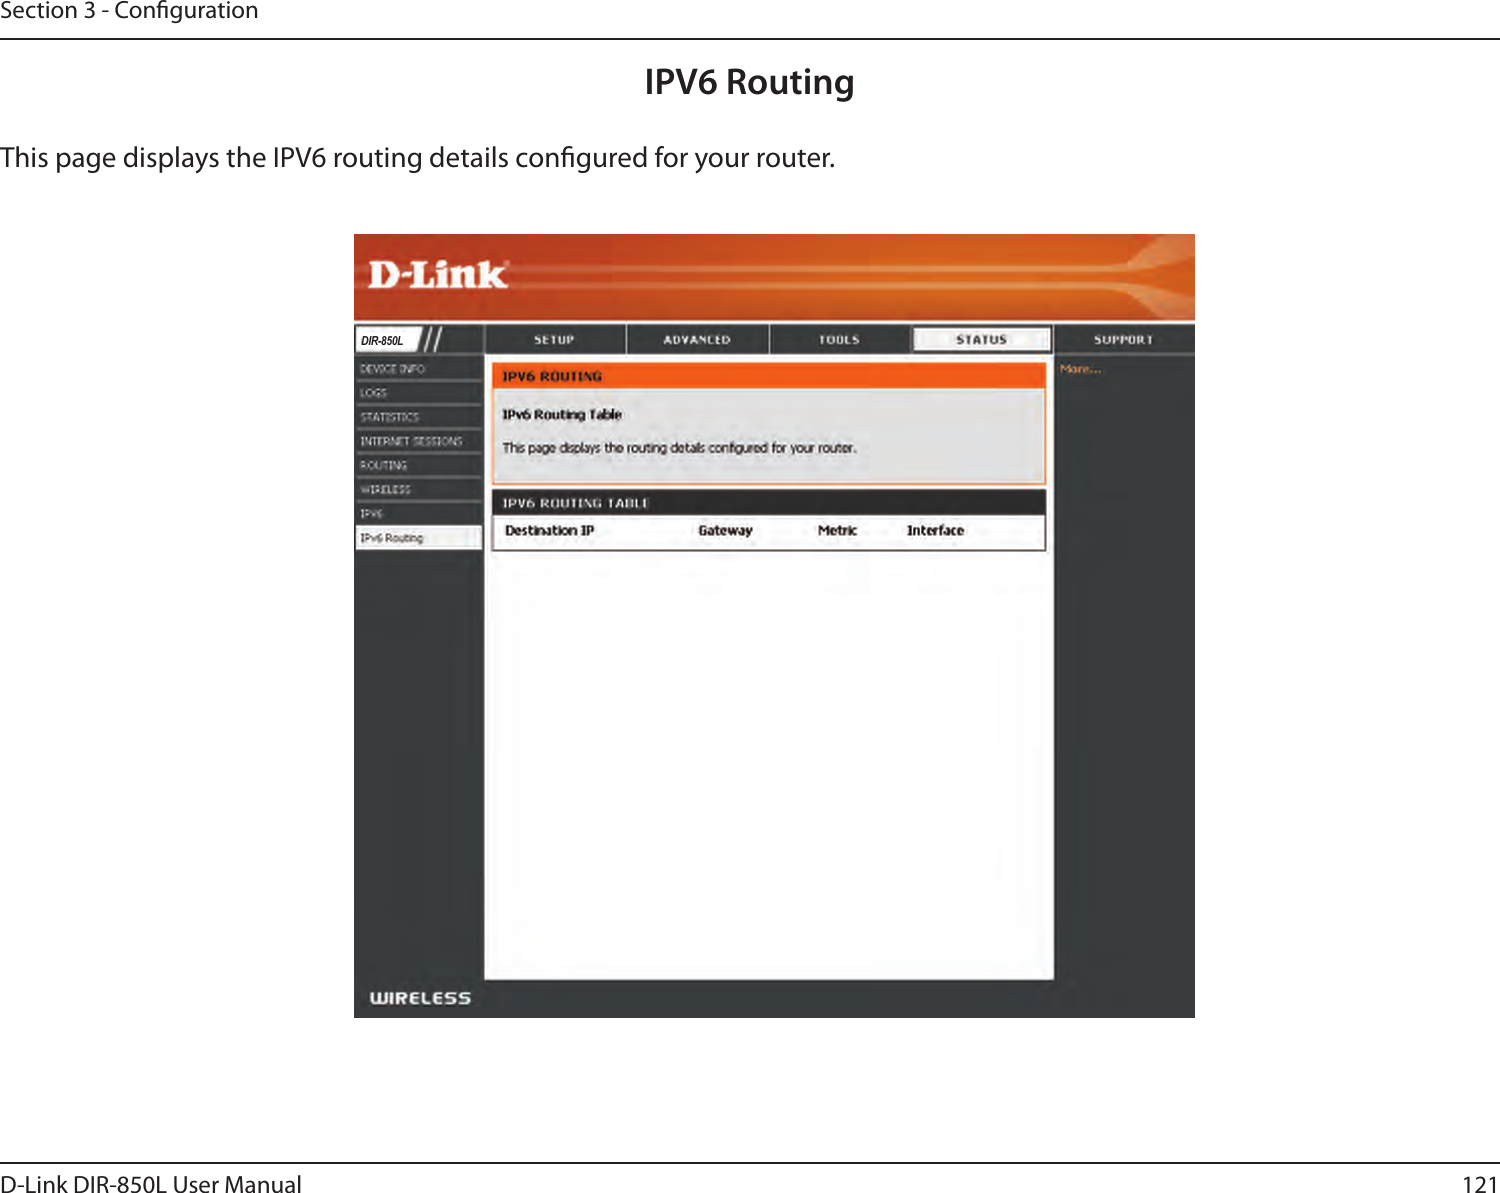 121D-Link DIR-850L User ManualSection 3 - CongurationIPV6 RoutingThis page displays the IPV6 routing details congured for your router. DIR-850L